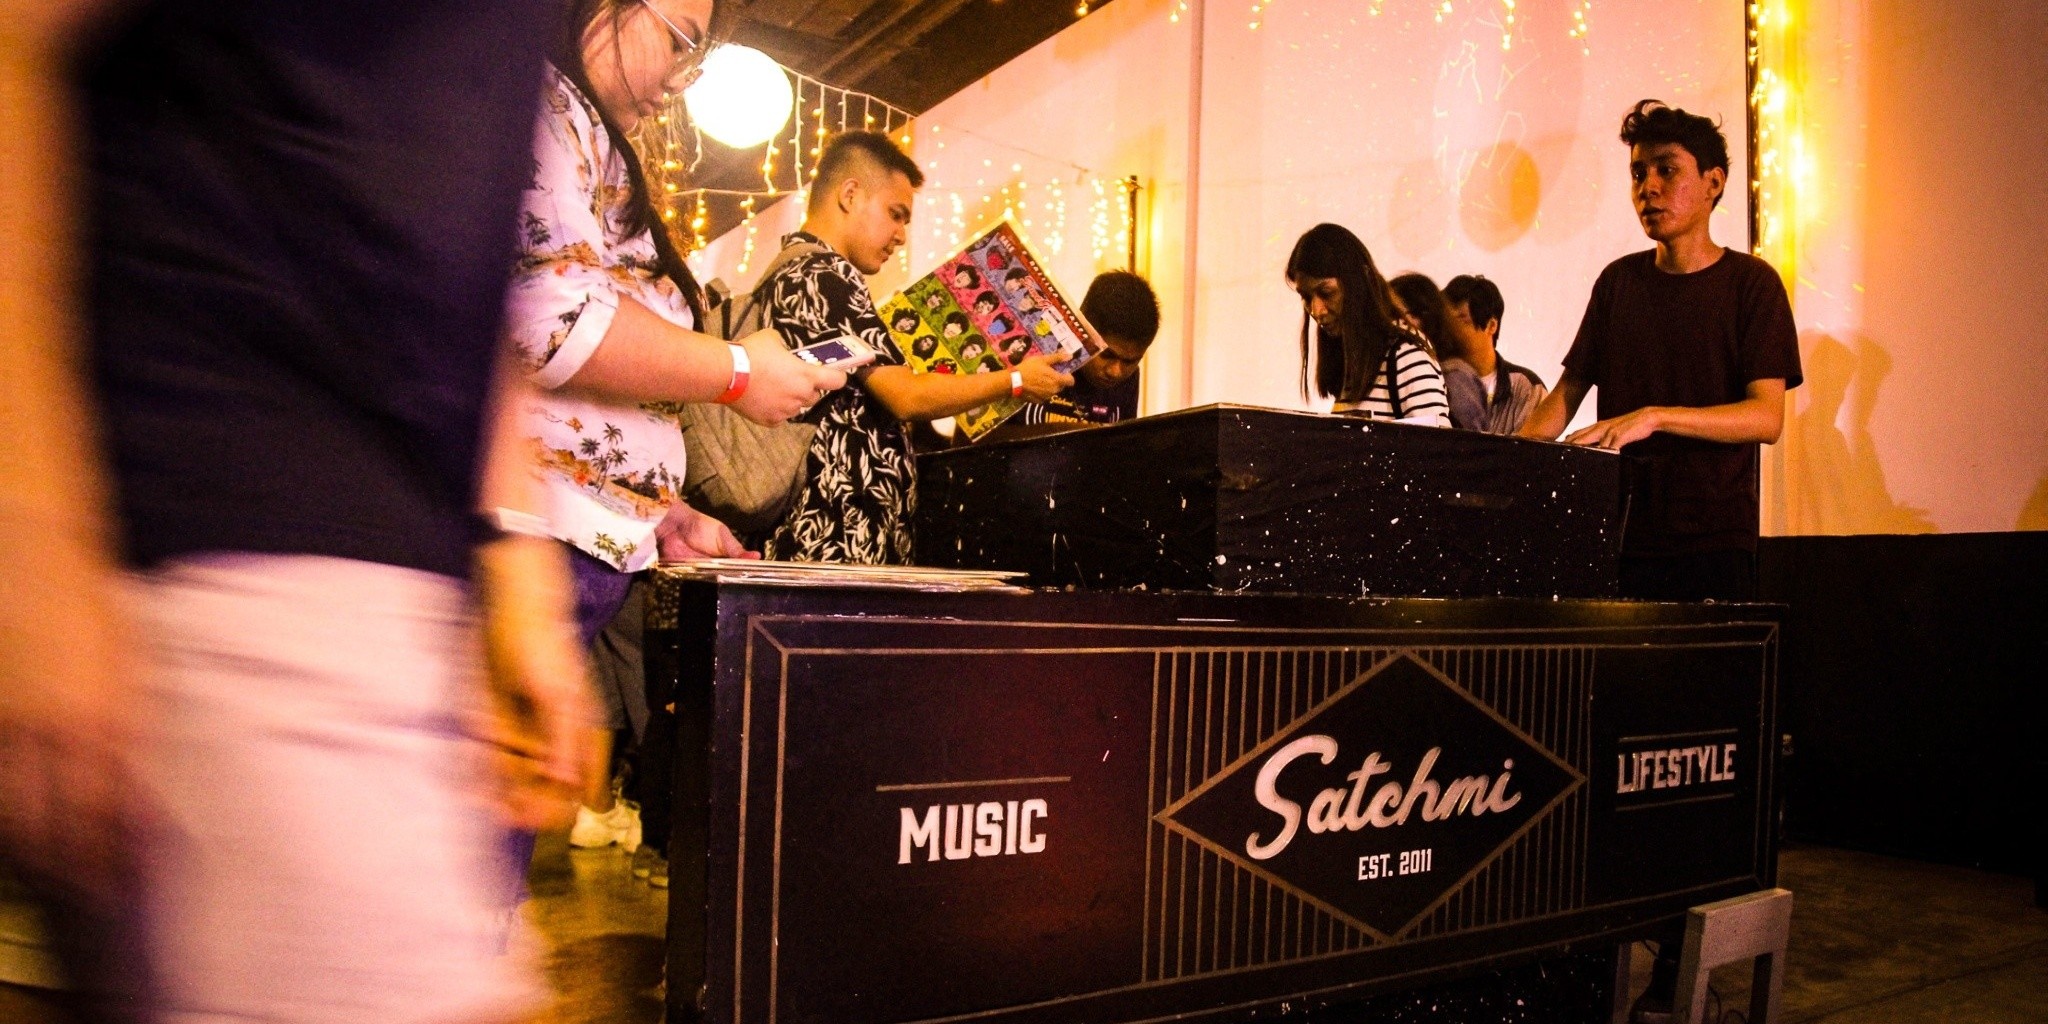 Satchmi unites music and art fans at Vinyl Day – photo gallery